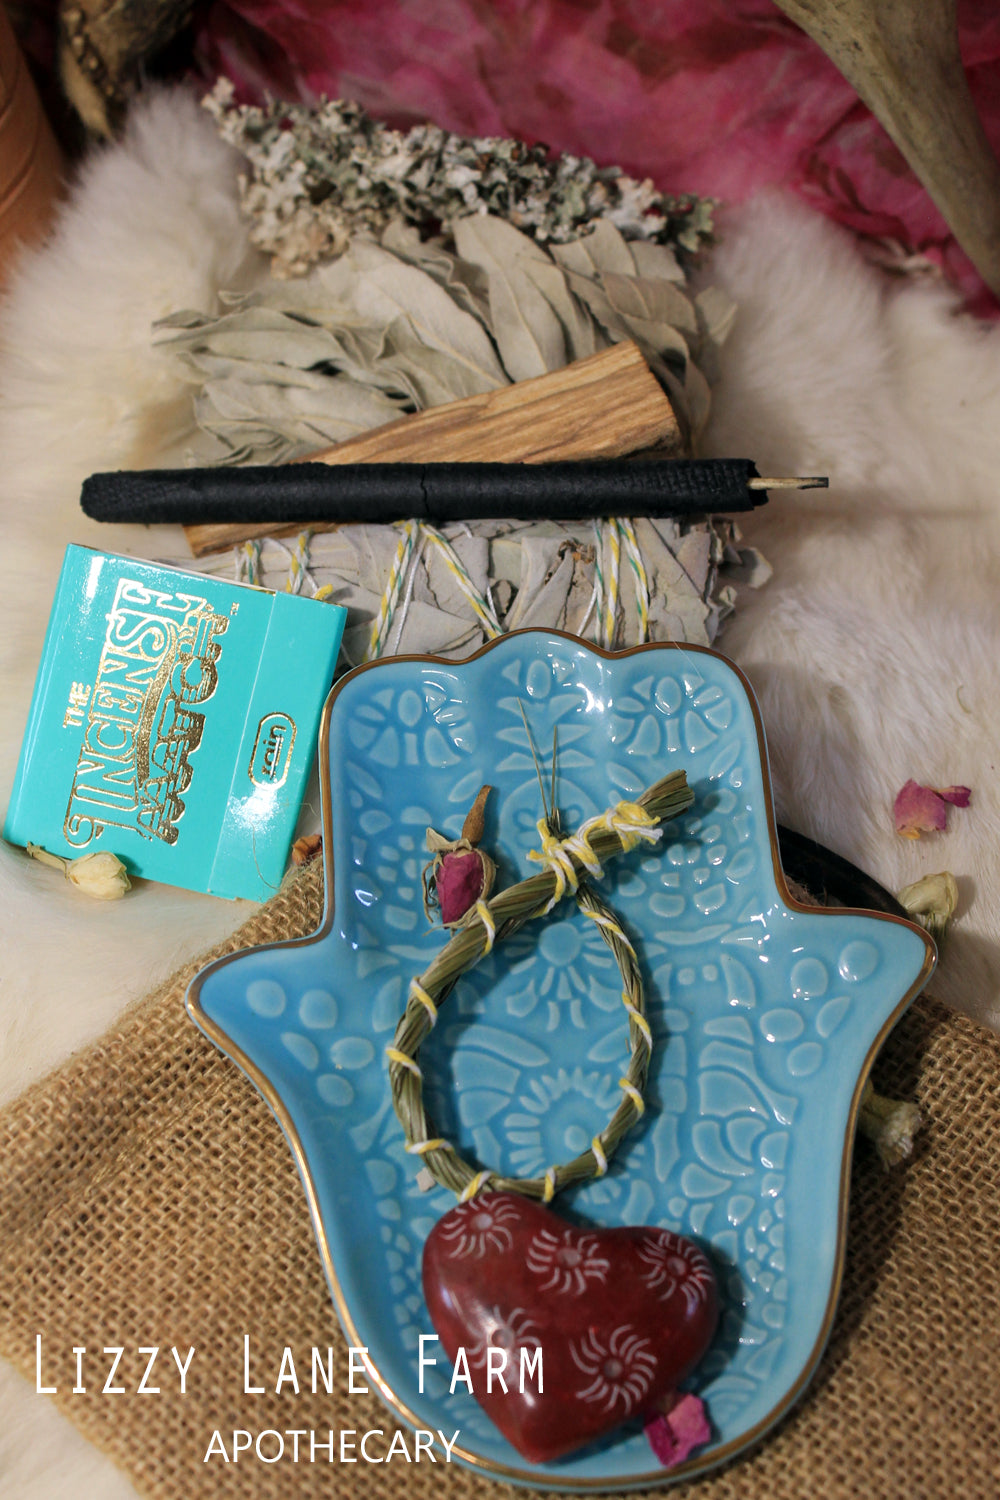 Hamsa Hand Smudge Kit | Brings it's owner happiness, luck, health, and good fortune.